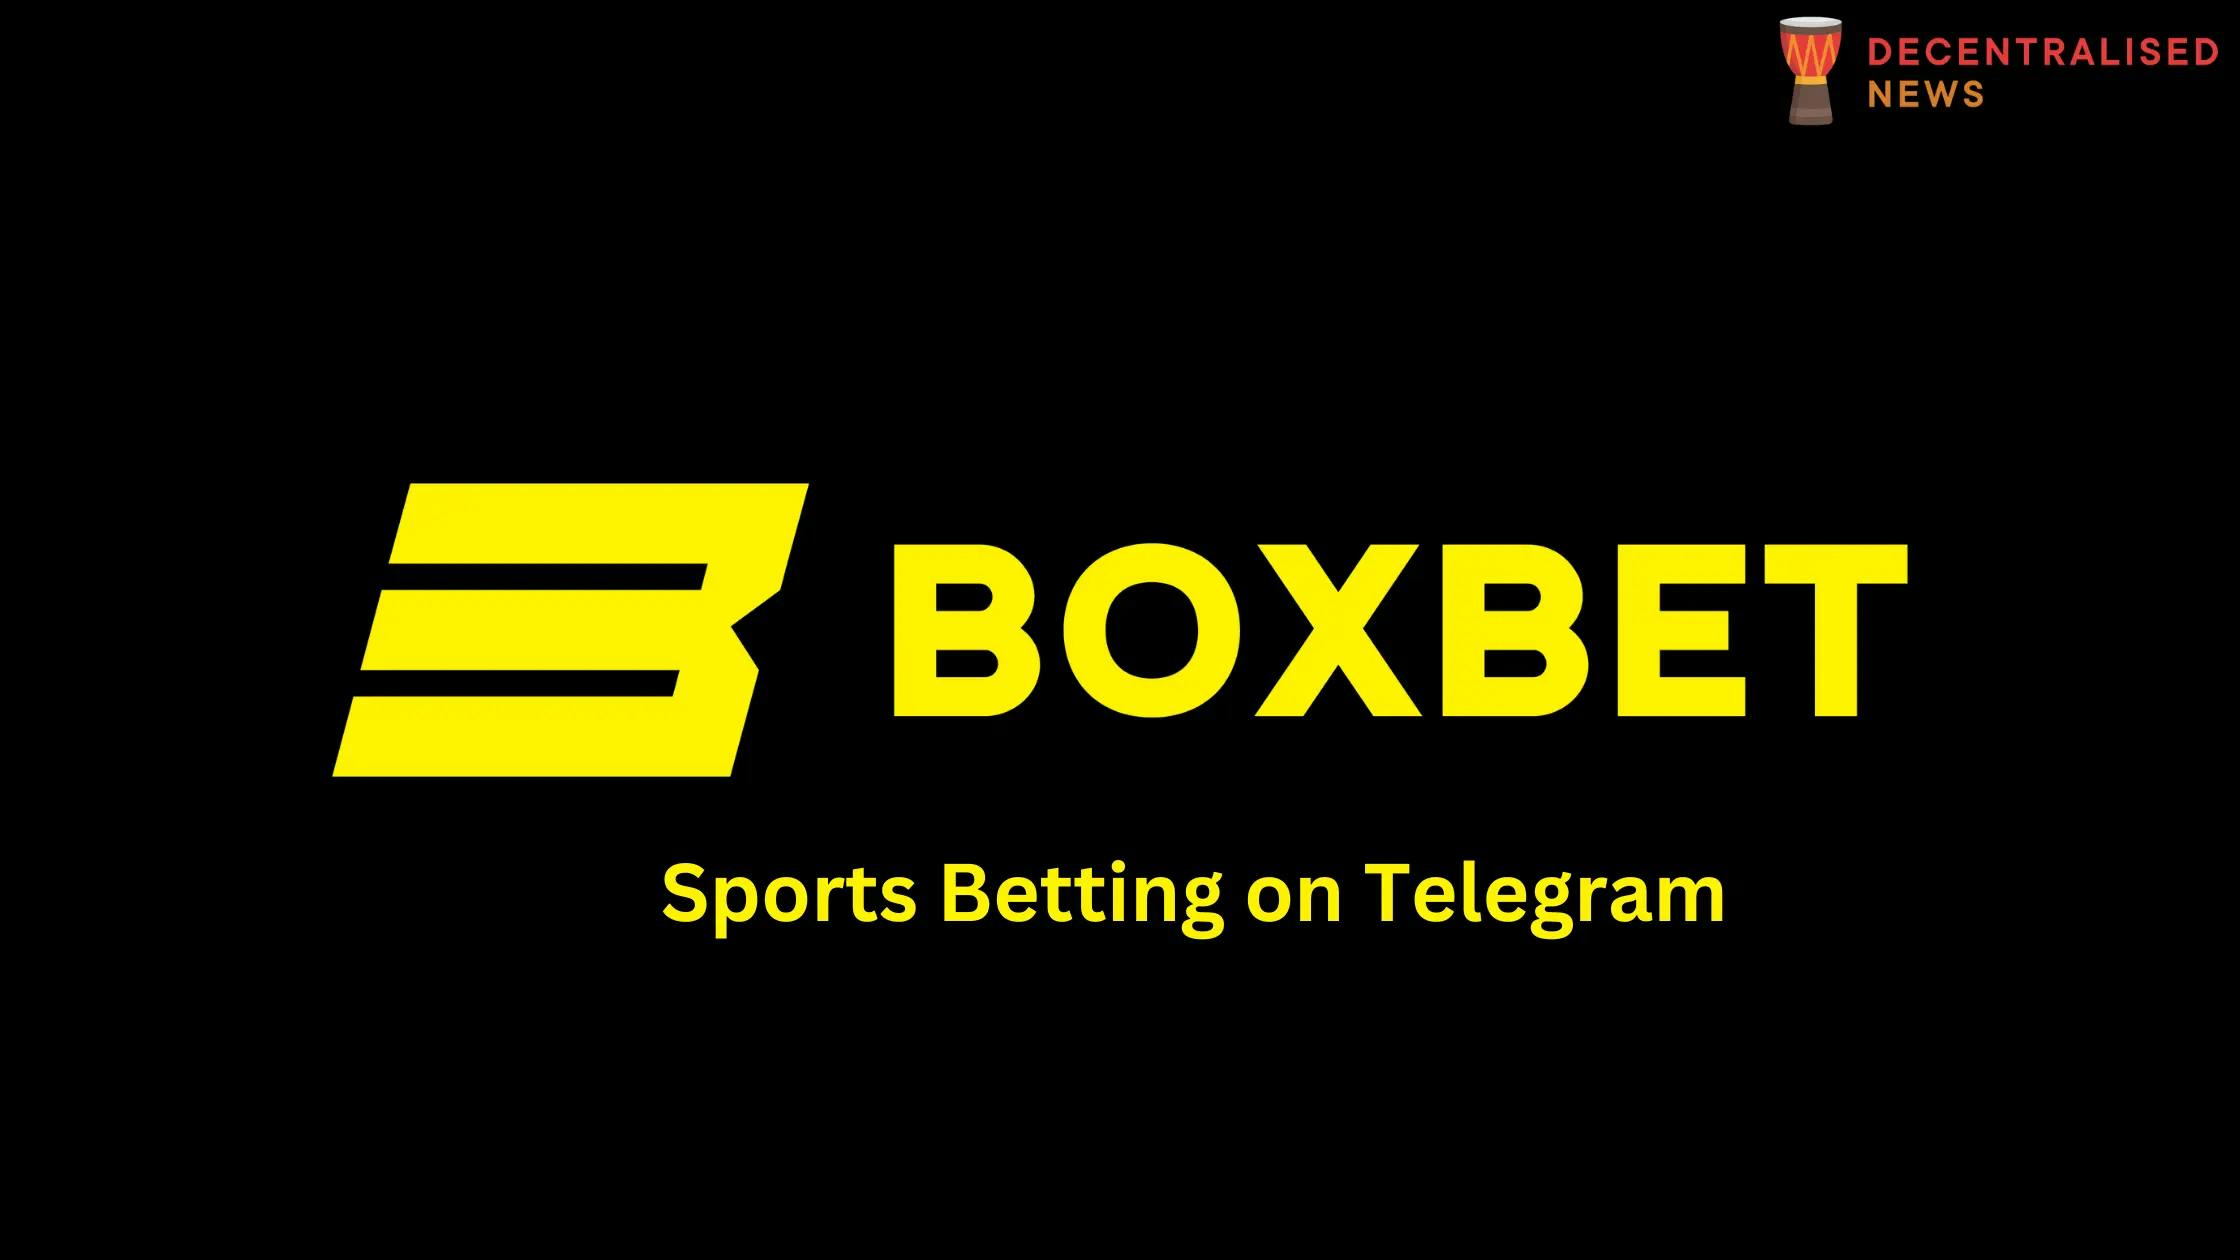 BoxBet iGaming App on Telegram Review